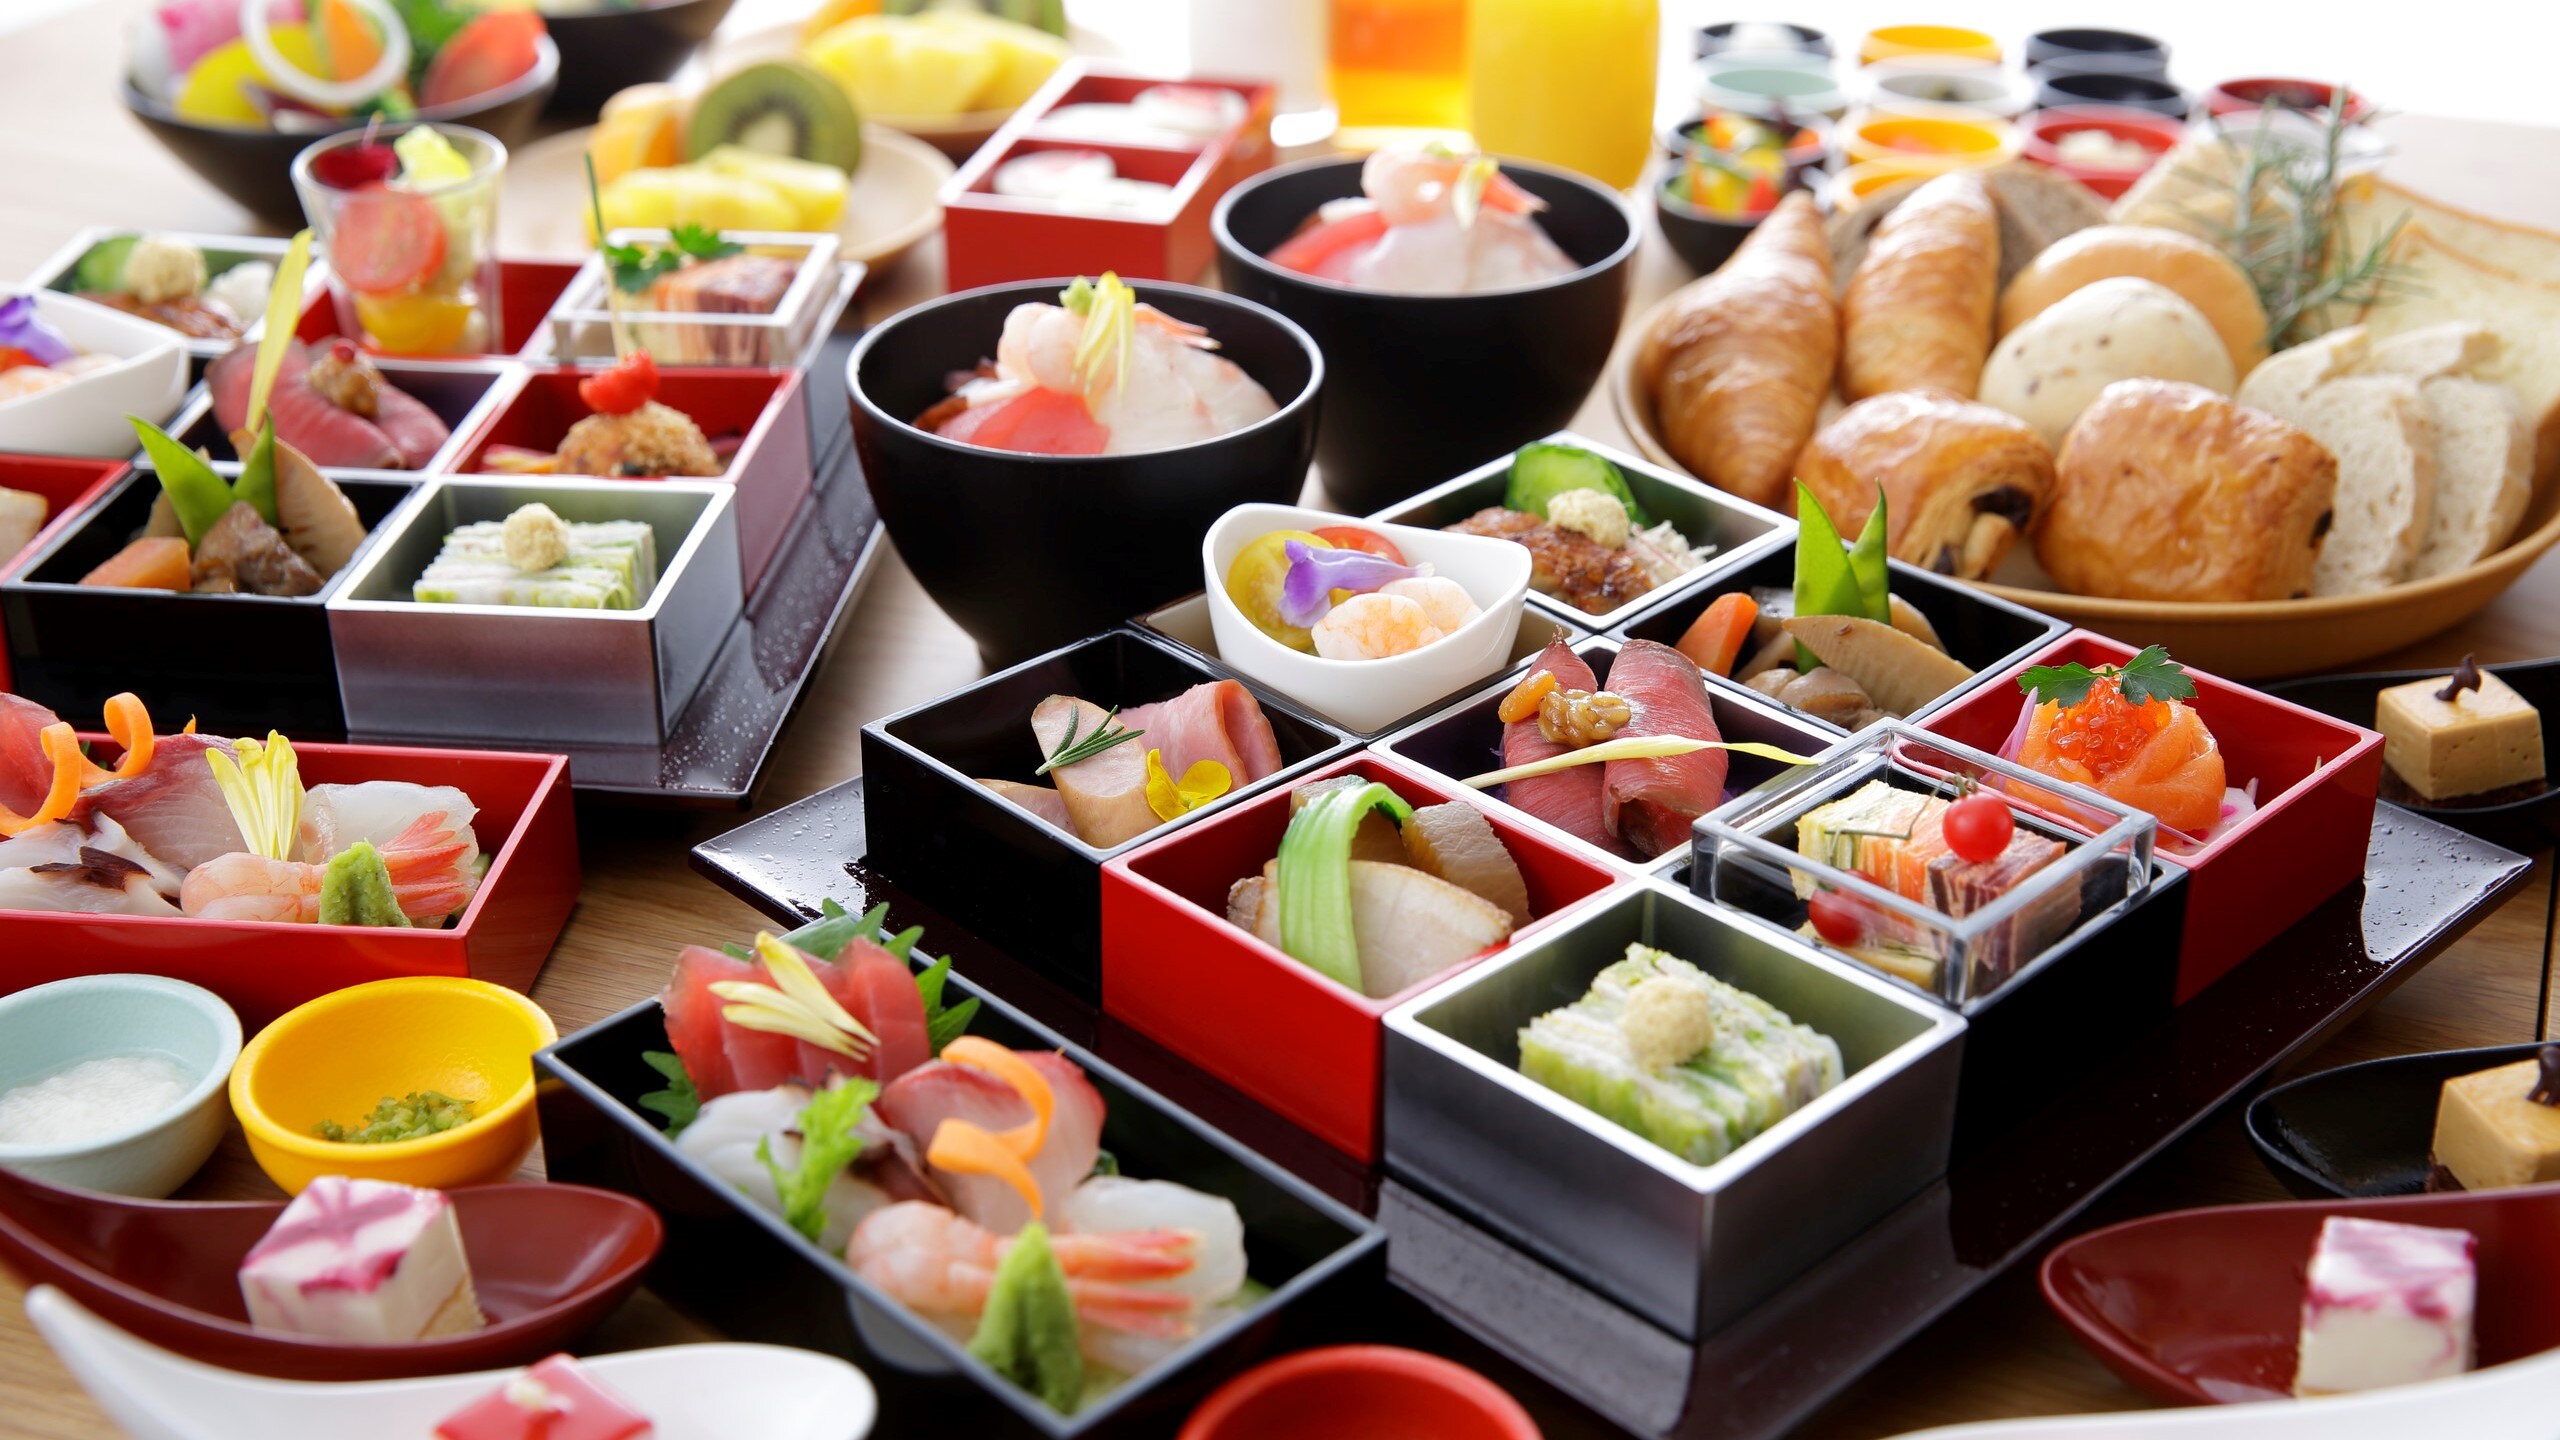 [Restaurant "Sora-KU-" breakfast] Fresh vegetables and fruits add color to your breakfast during your trip.